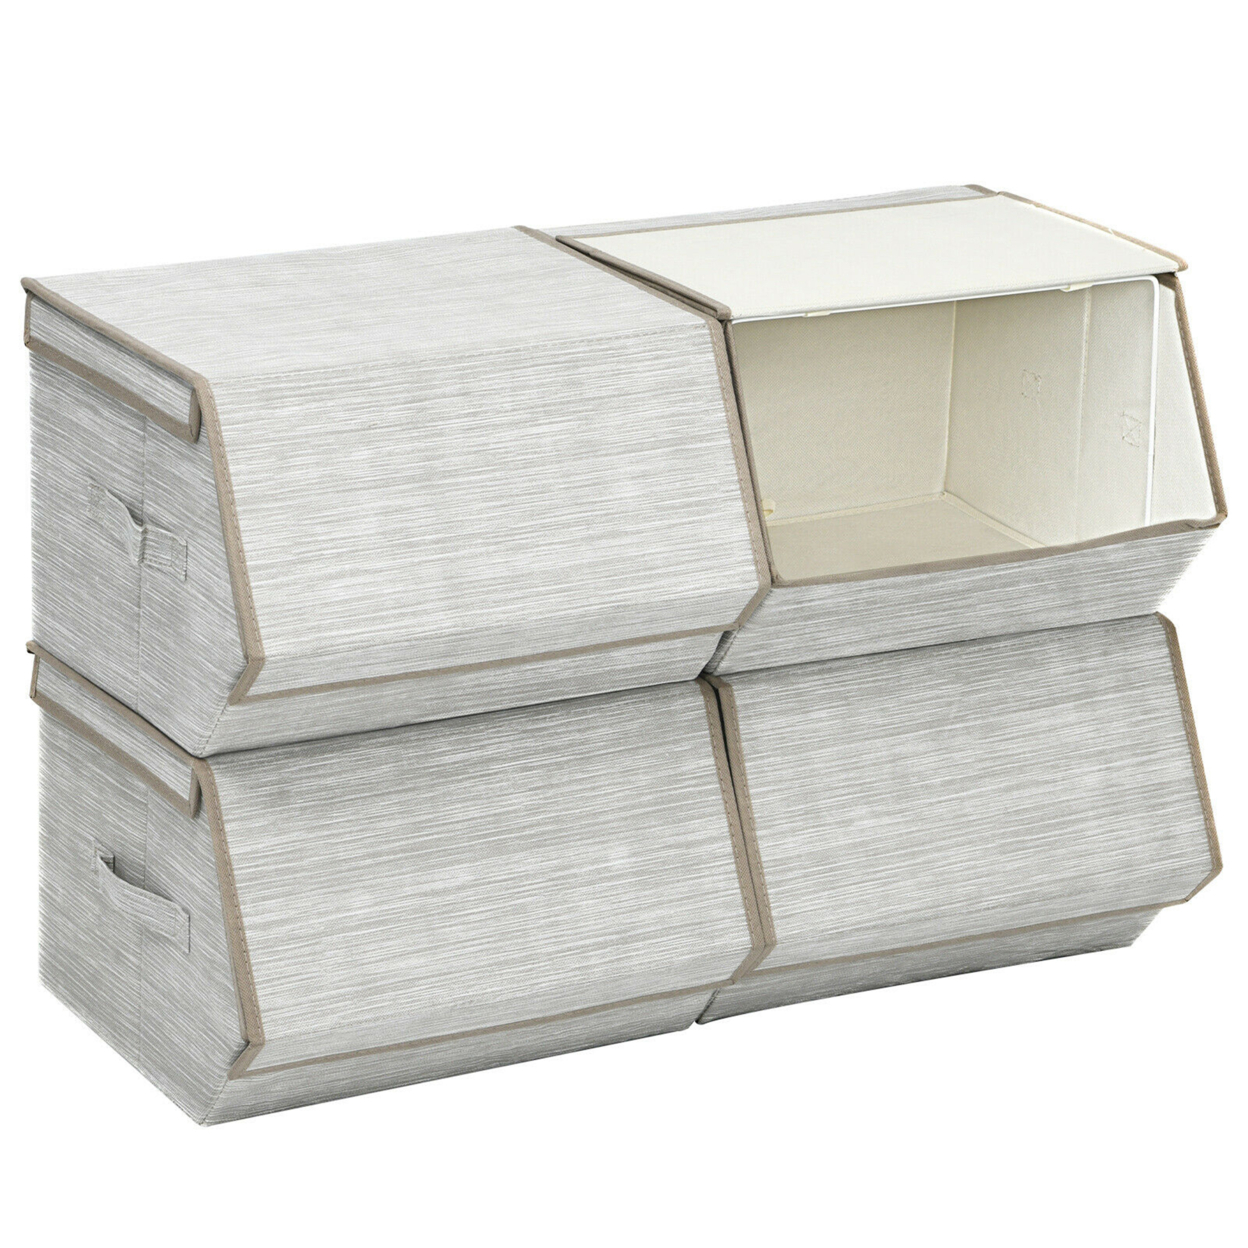 Stackable Large Bins Cubes W/Lids Storage Organizers W/Linen&Oxford Fabric 4Sets